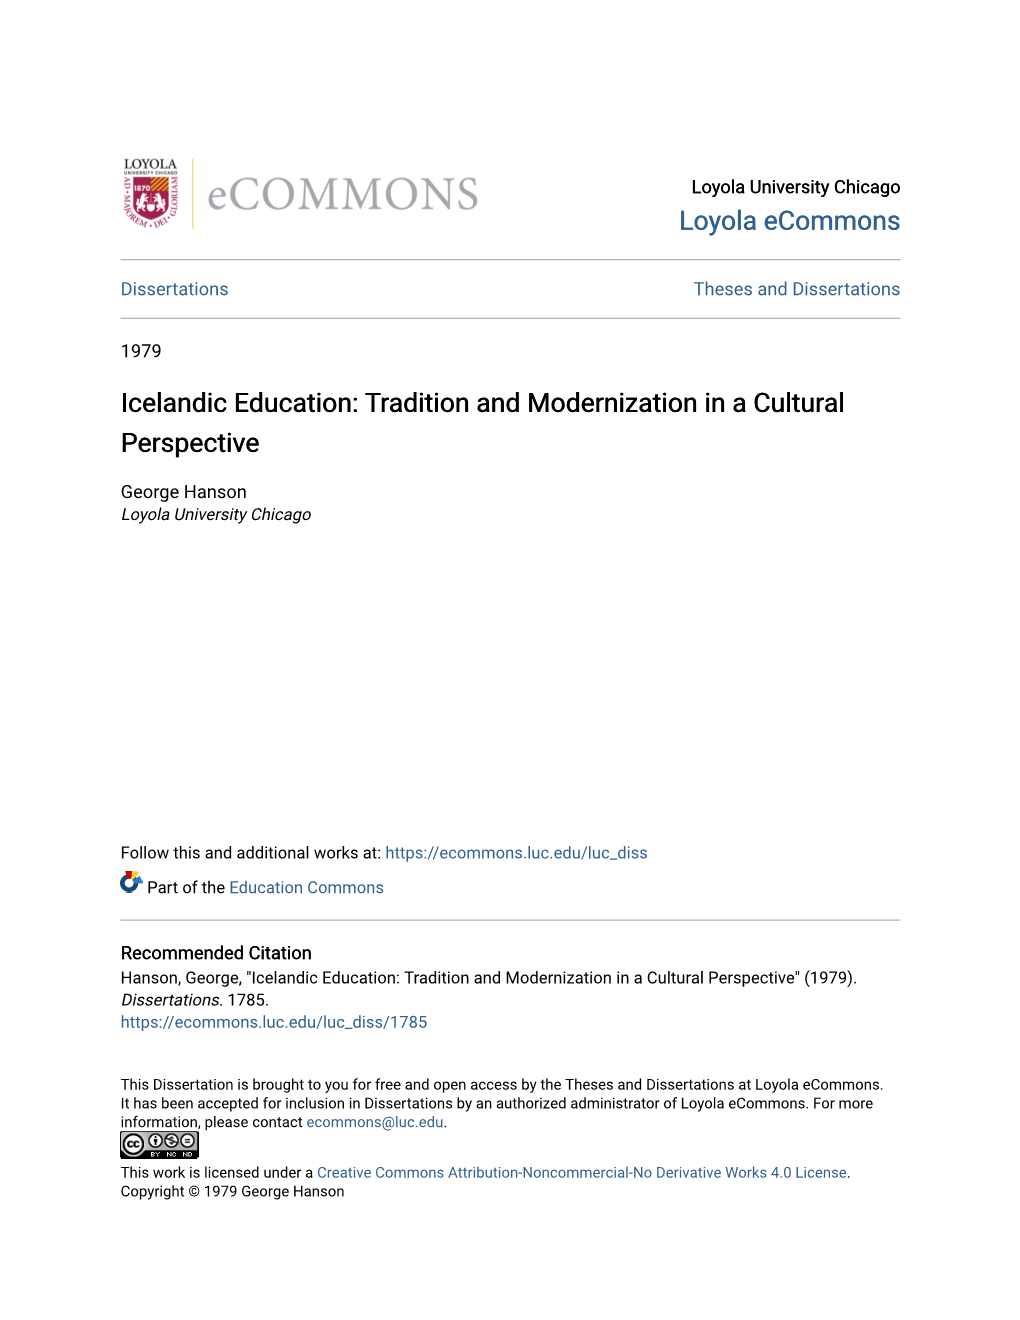 Icelandic Education: Tradition and Modernization in a Cultural Perspective